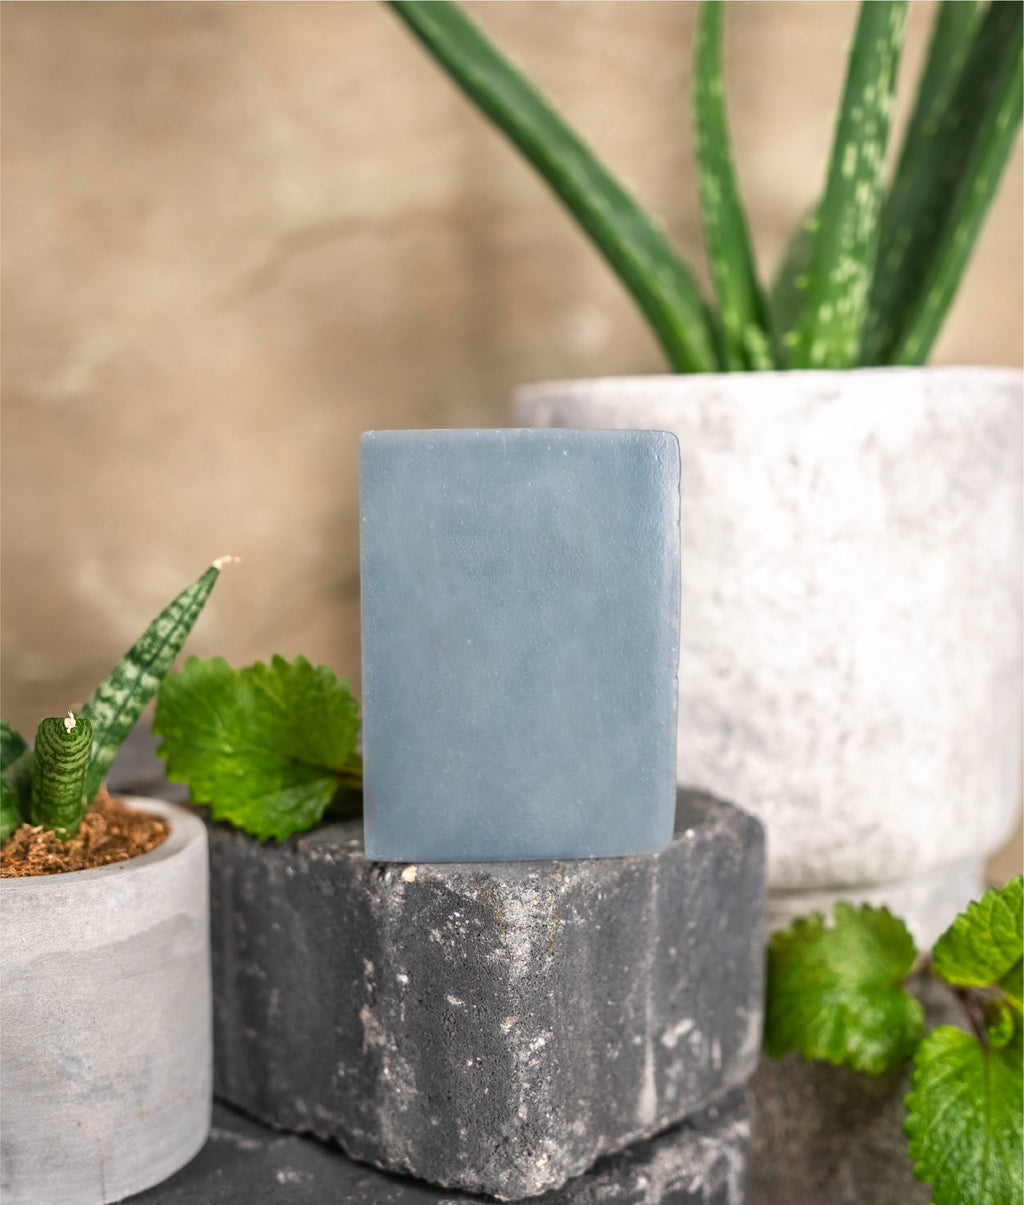 Aloe mint soap sitting on a block of concrete with two aloe plants and mint leaves